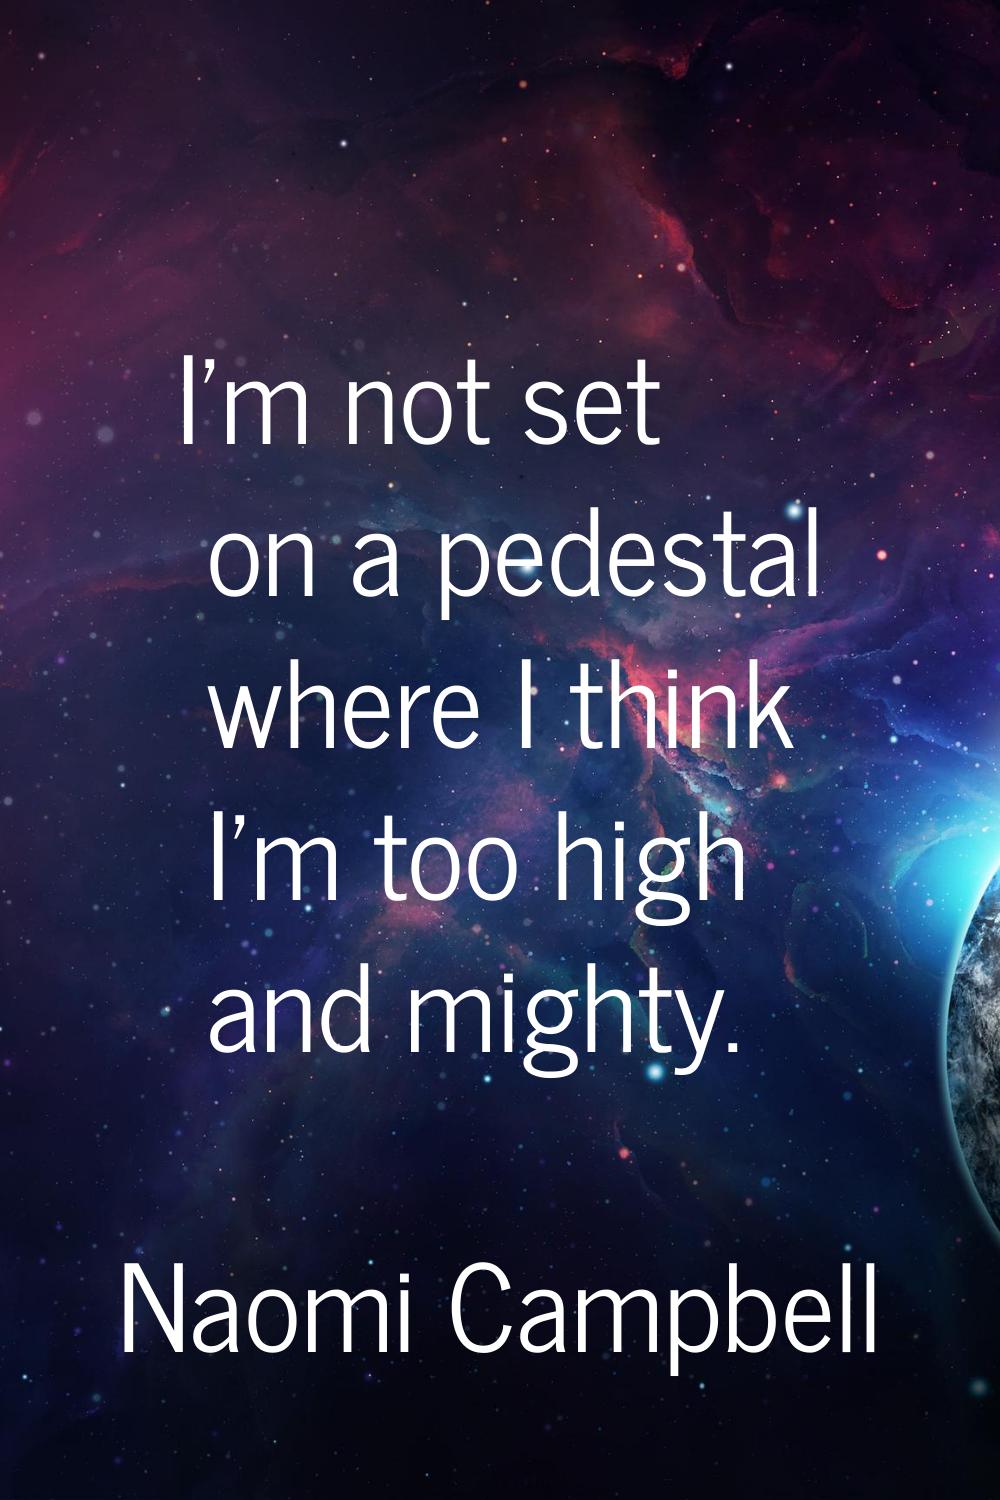 I'm not set on a pedestal where I think I'm too high and mighty.